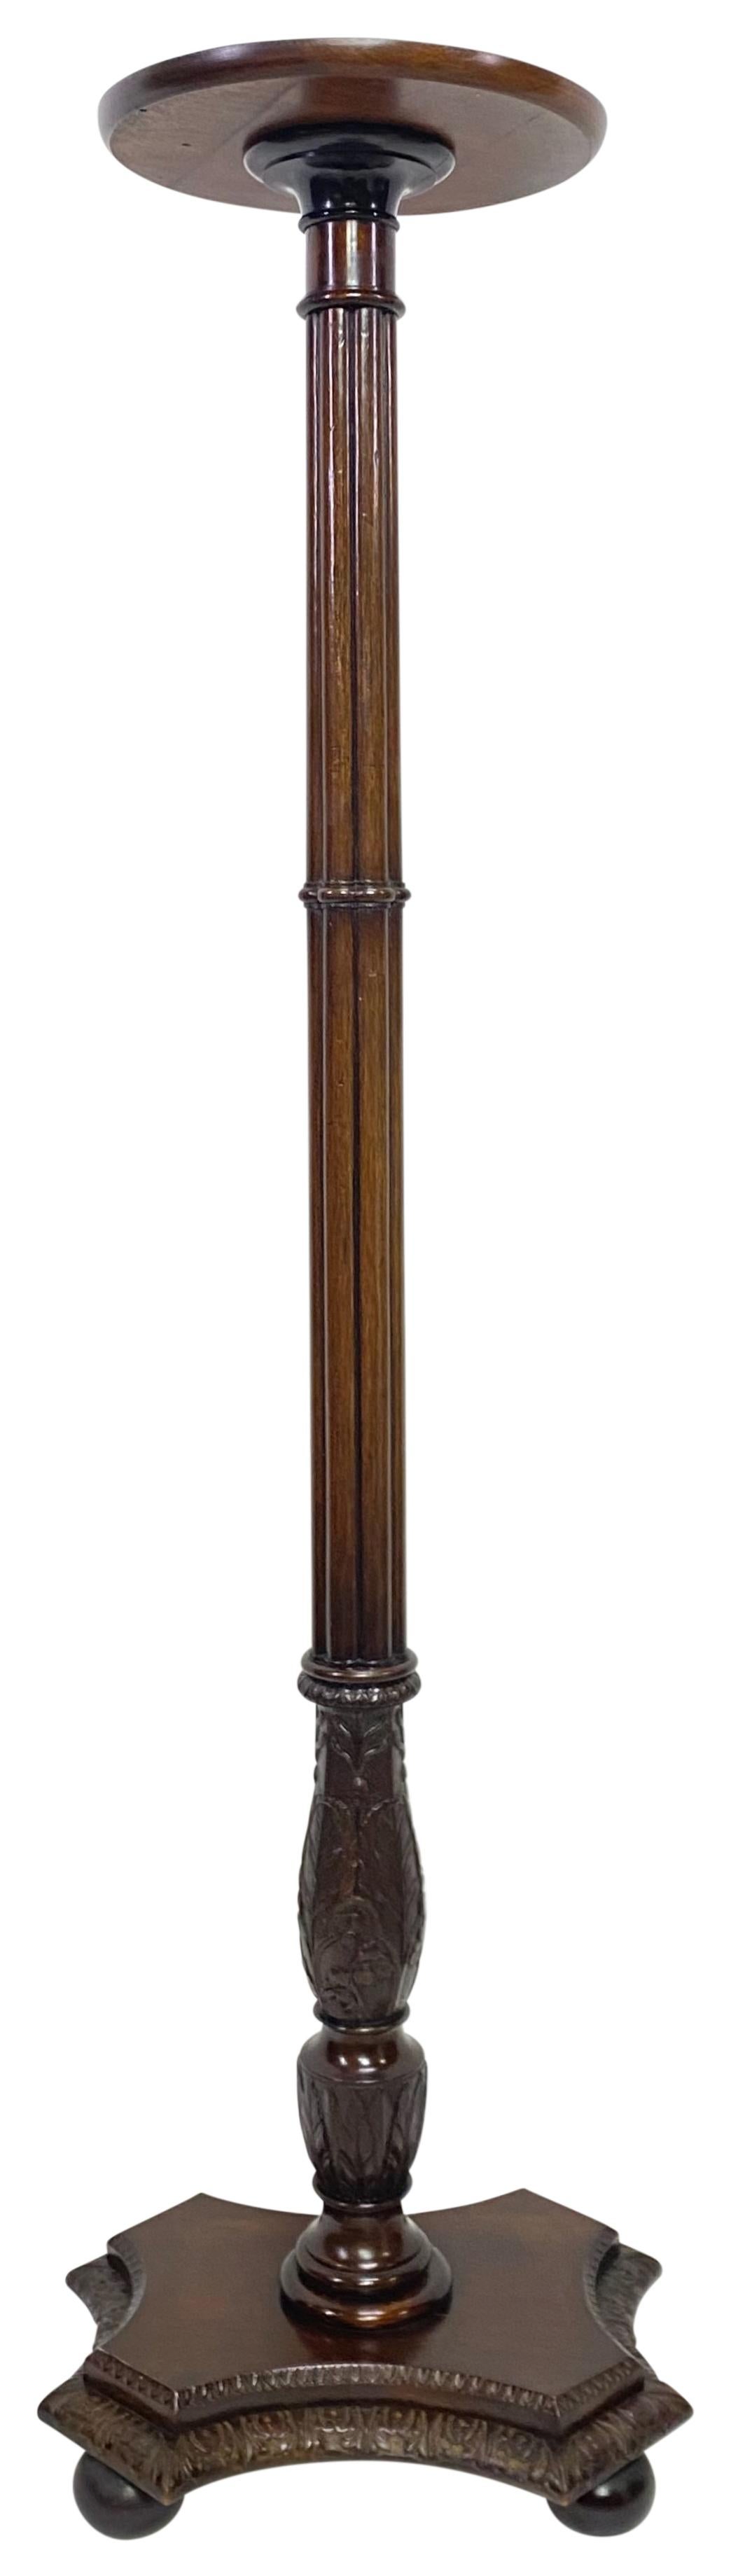 A tall Georgian period carved mahogany torchere fern stand.
Solid mahogany of quality craftsmanship. Stands sturdy and displays beautifully.
England, late 19th / early 19th century


